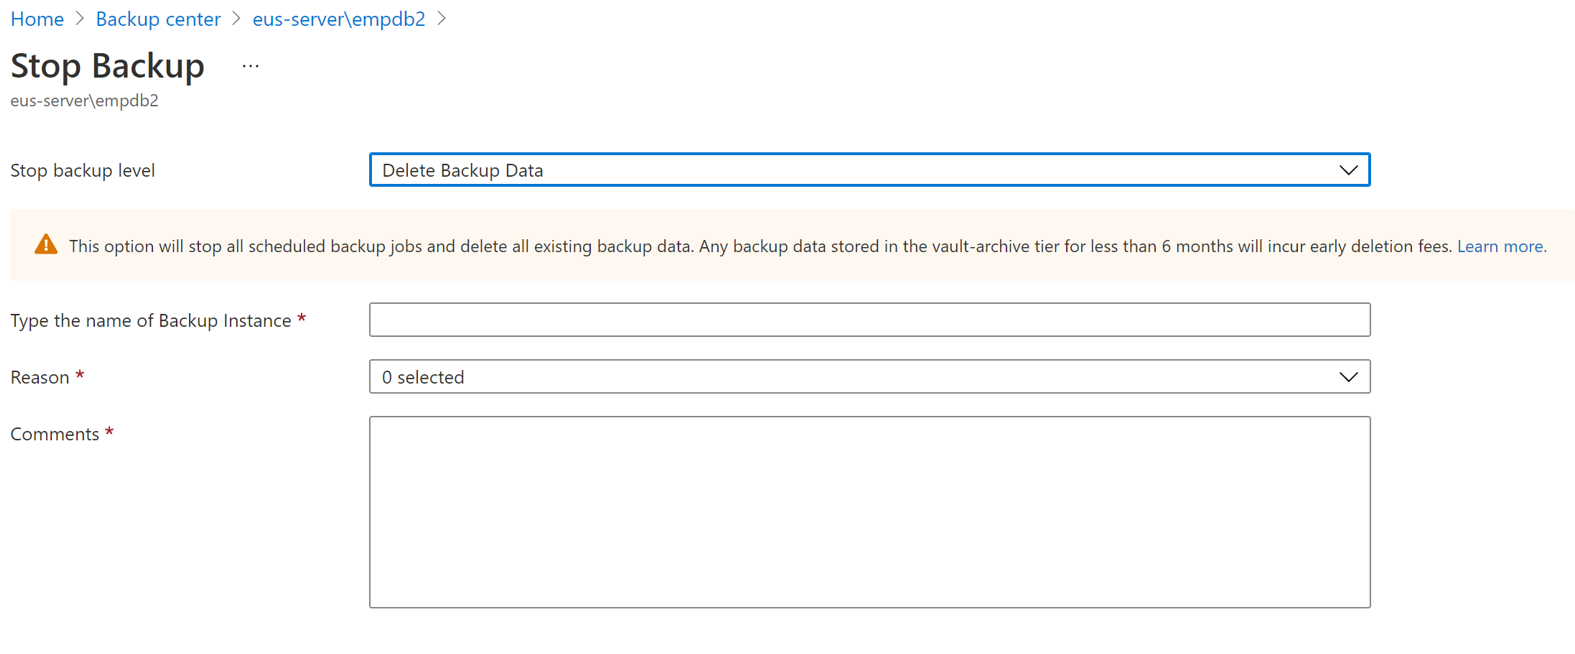 Screenshot showing the option to delete backup data and the detail required to be added.